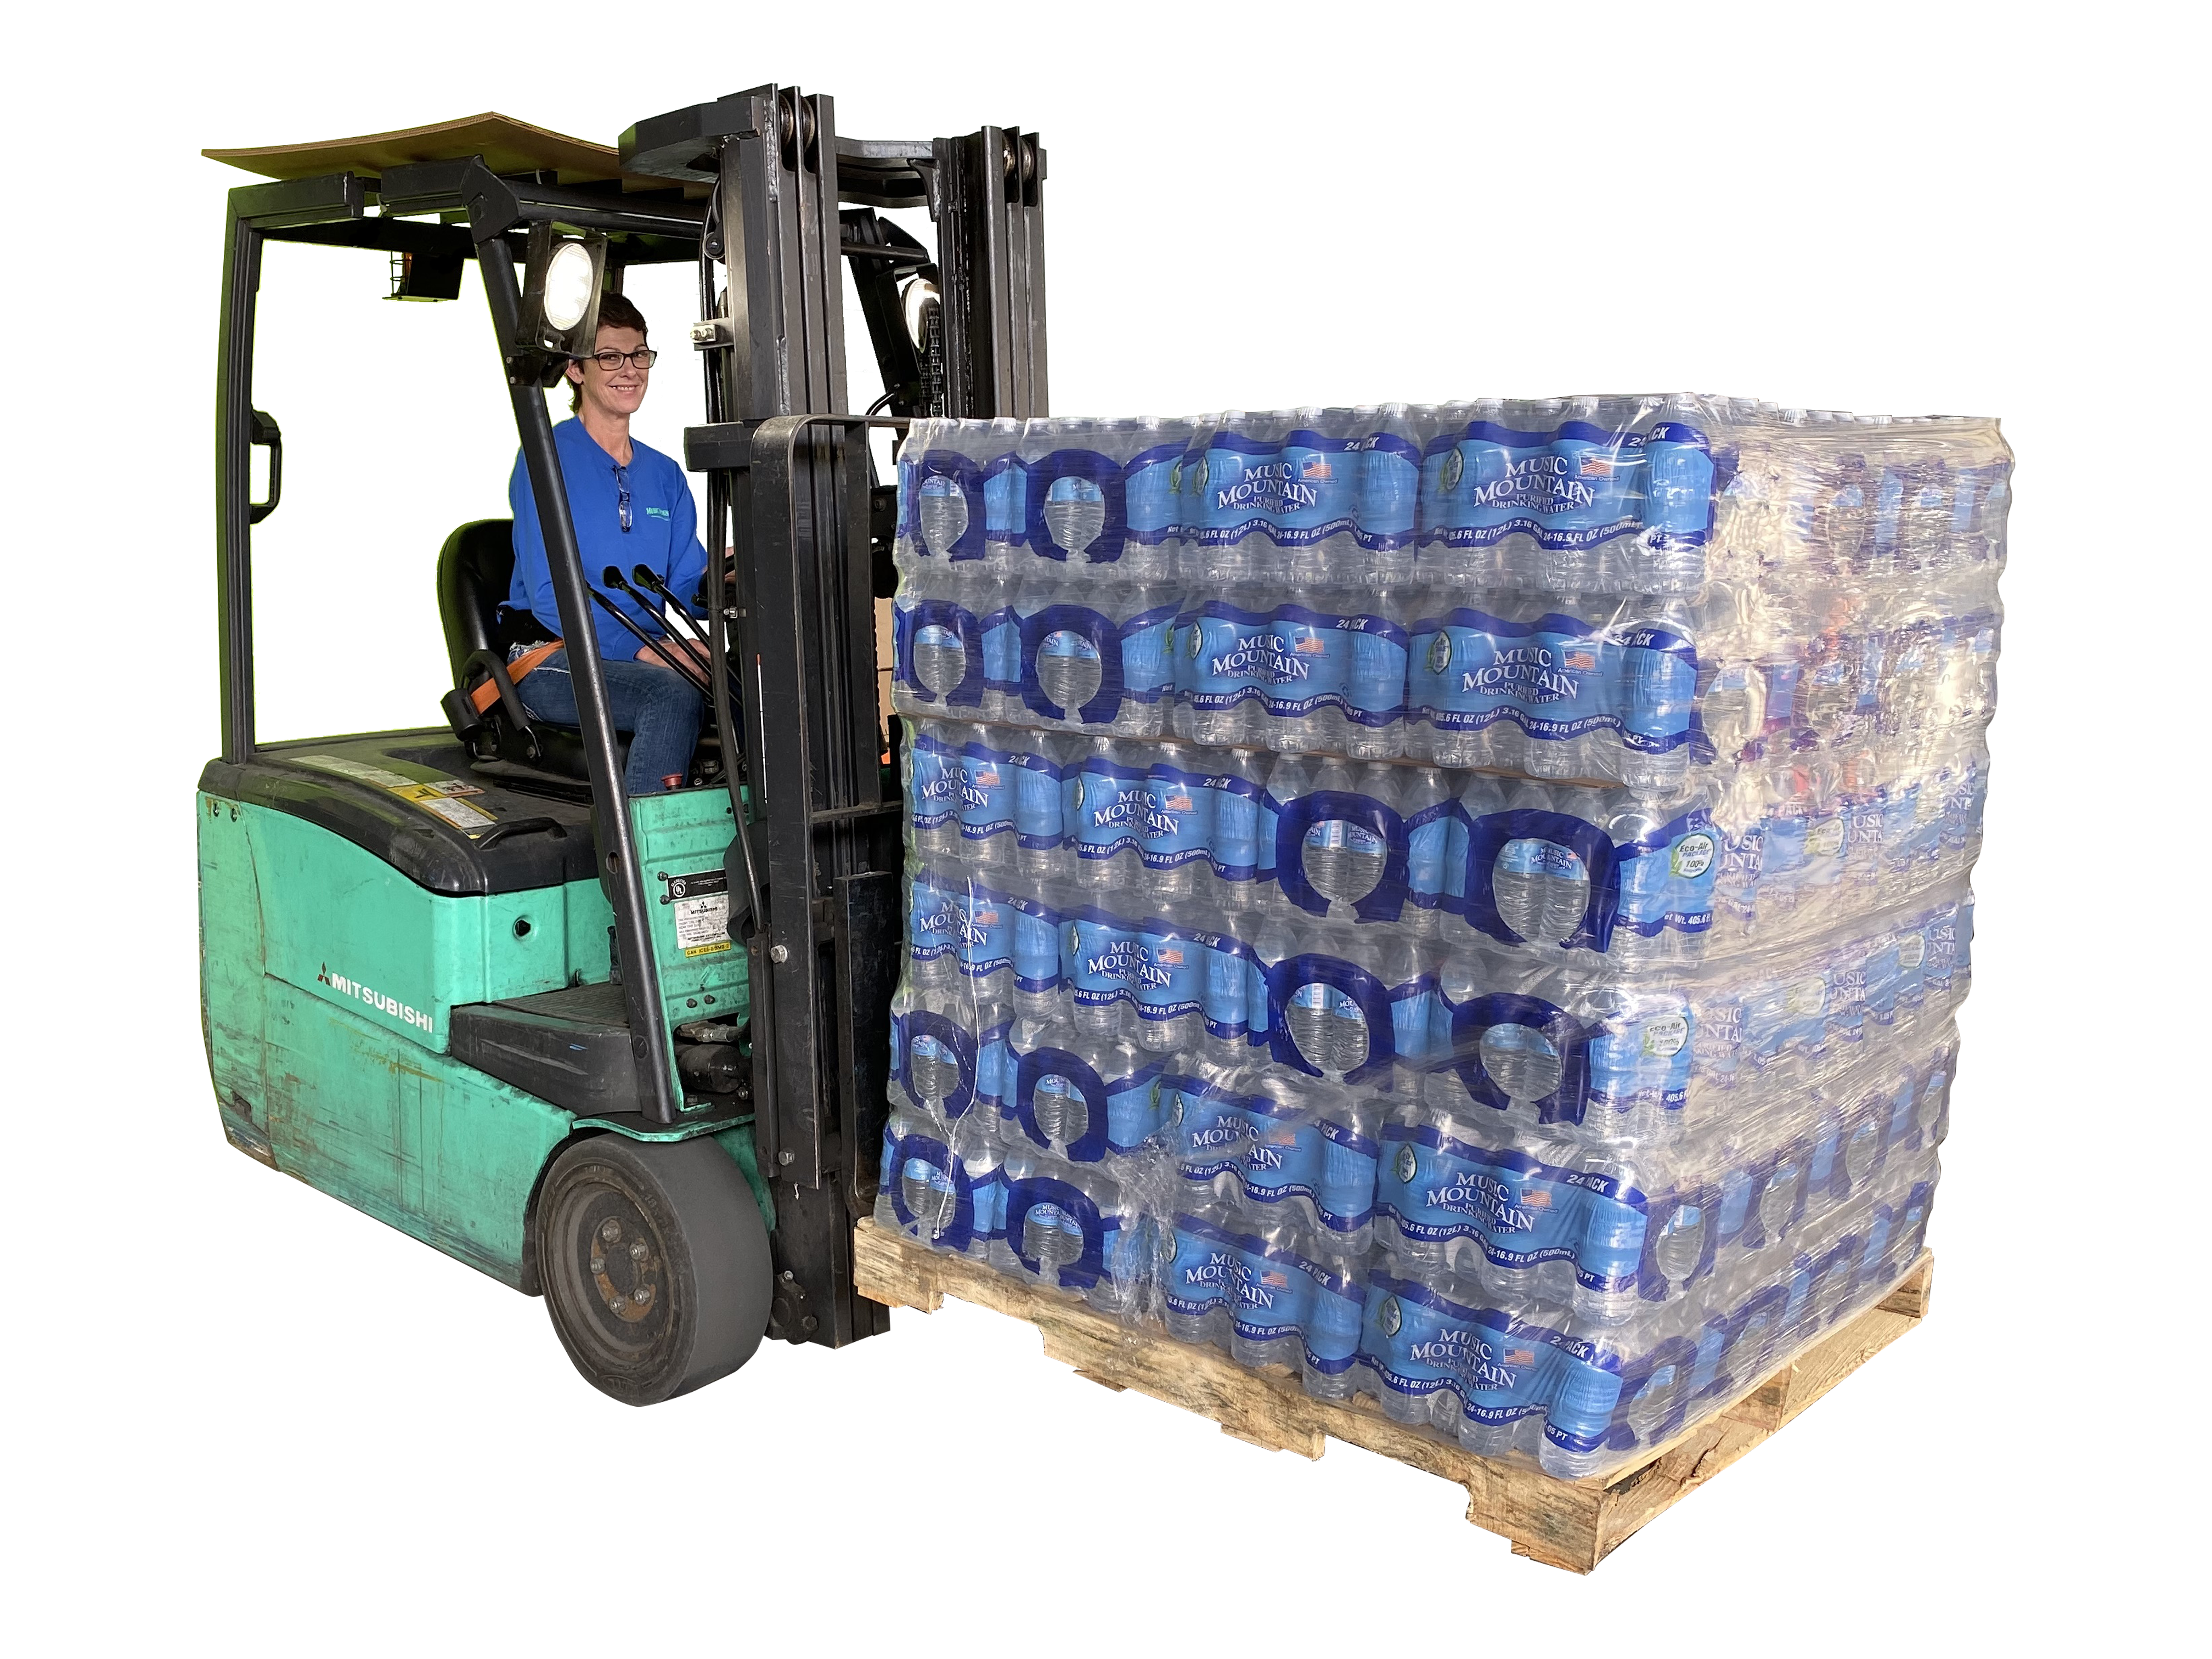 Spring Water Bottles and Water Cooler Delivery – Mountainwood